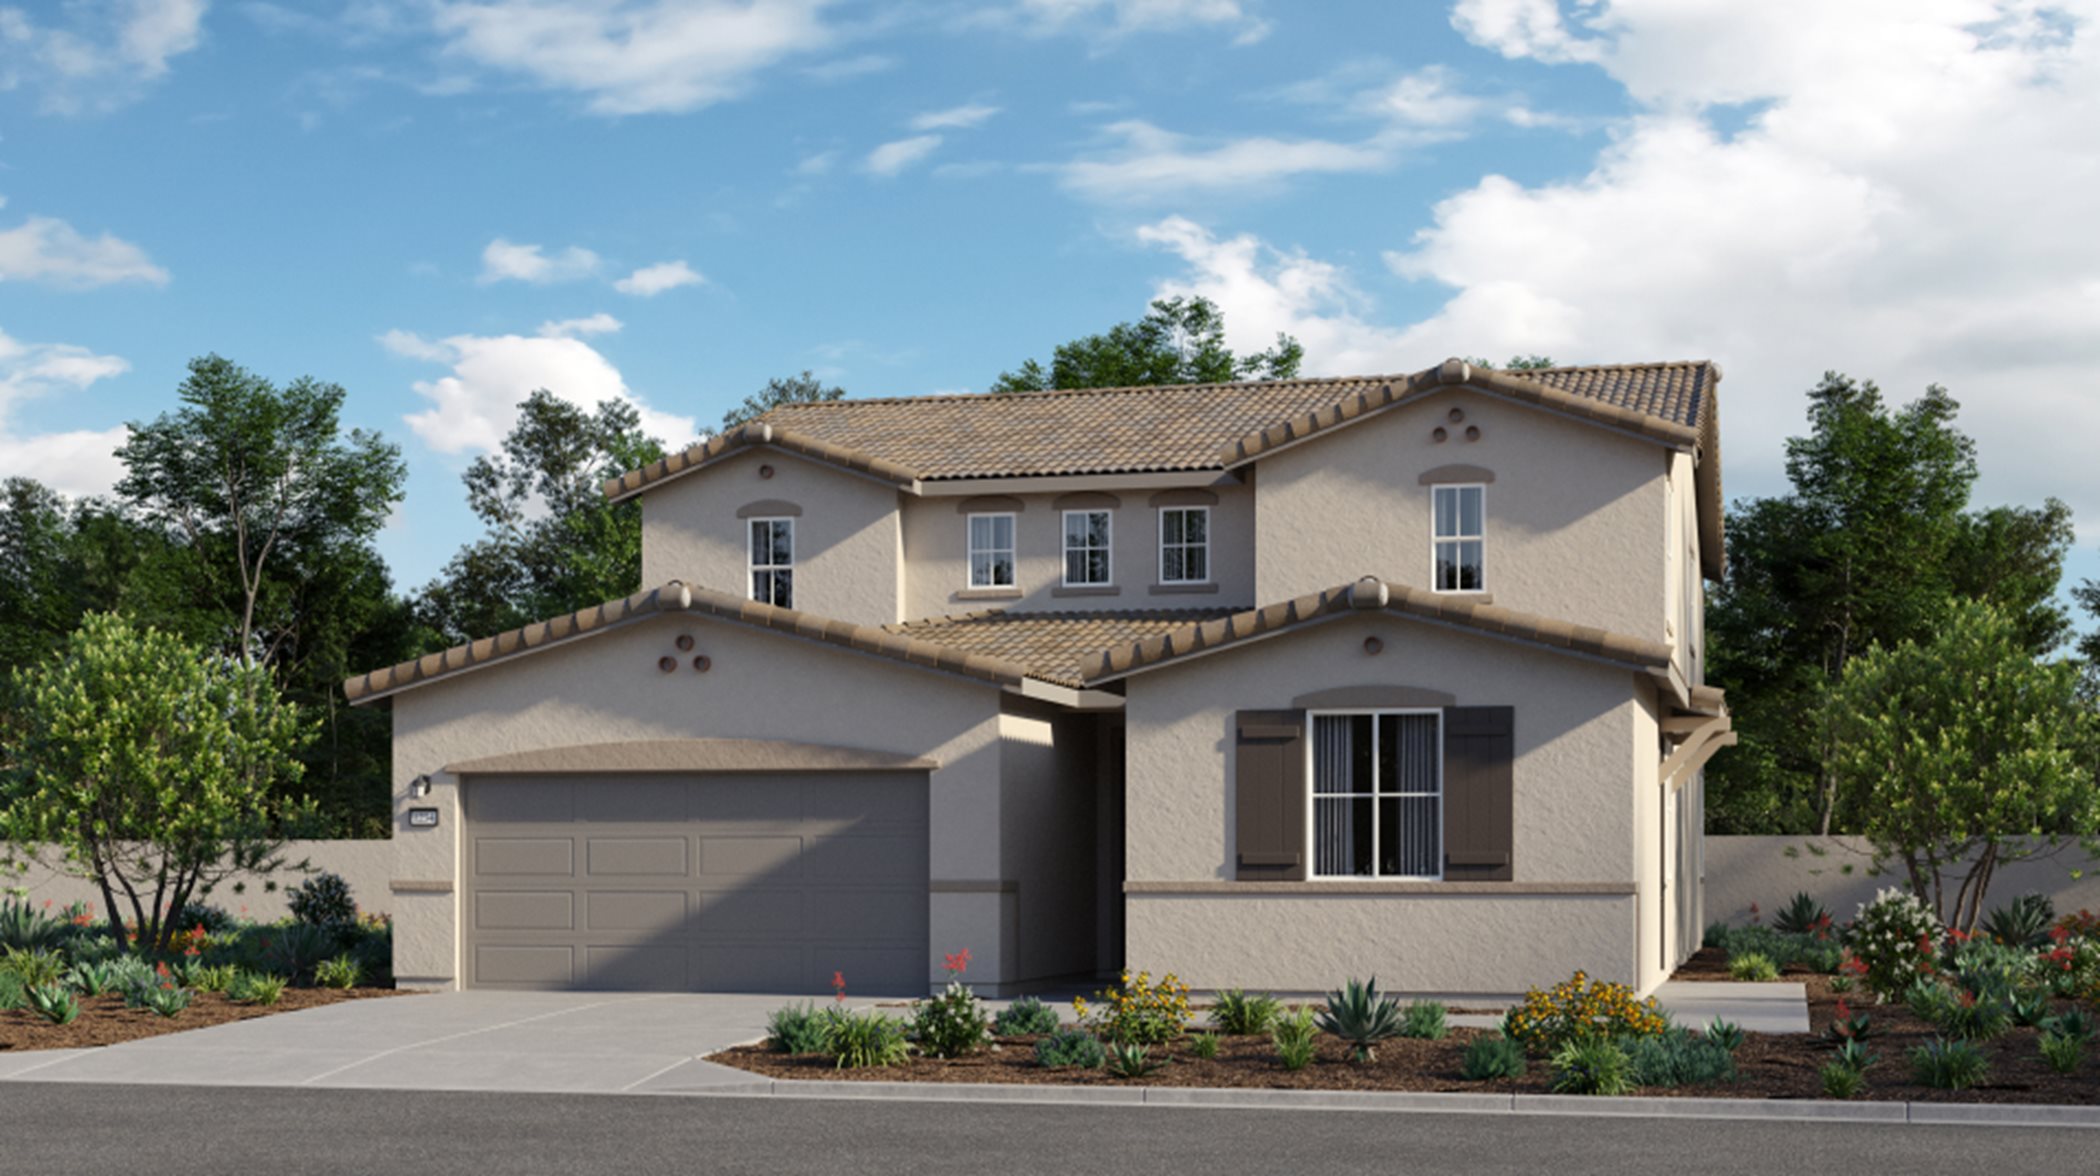 Spanish style home rendering